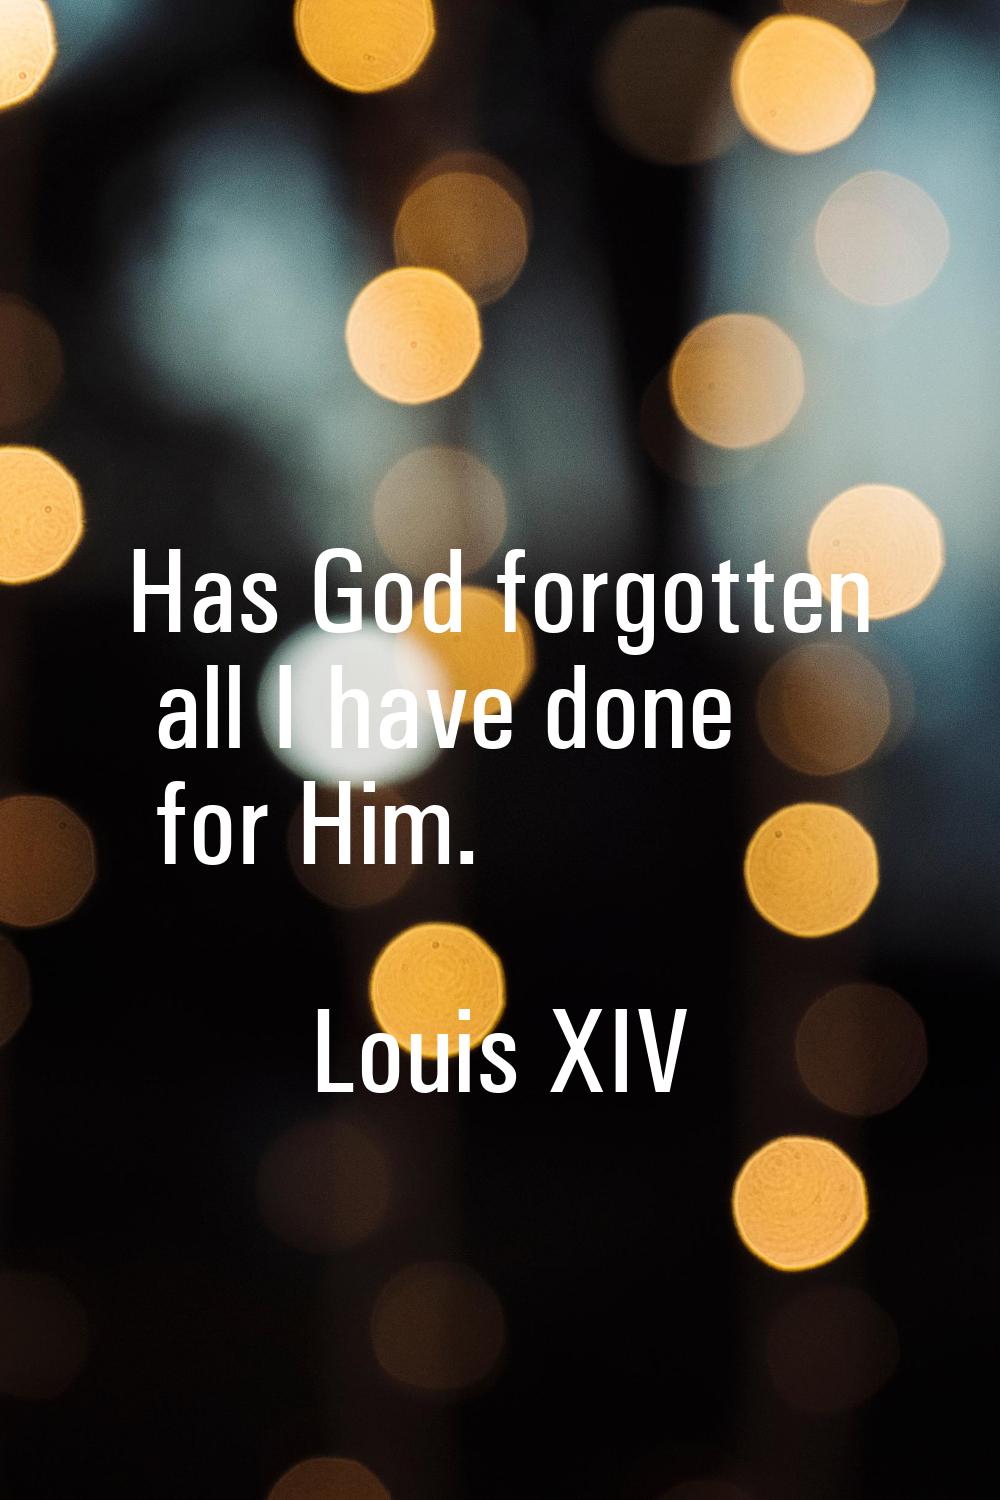 Has God forgotten all I have done for Him.